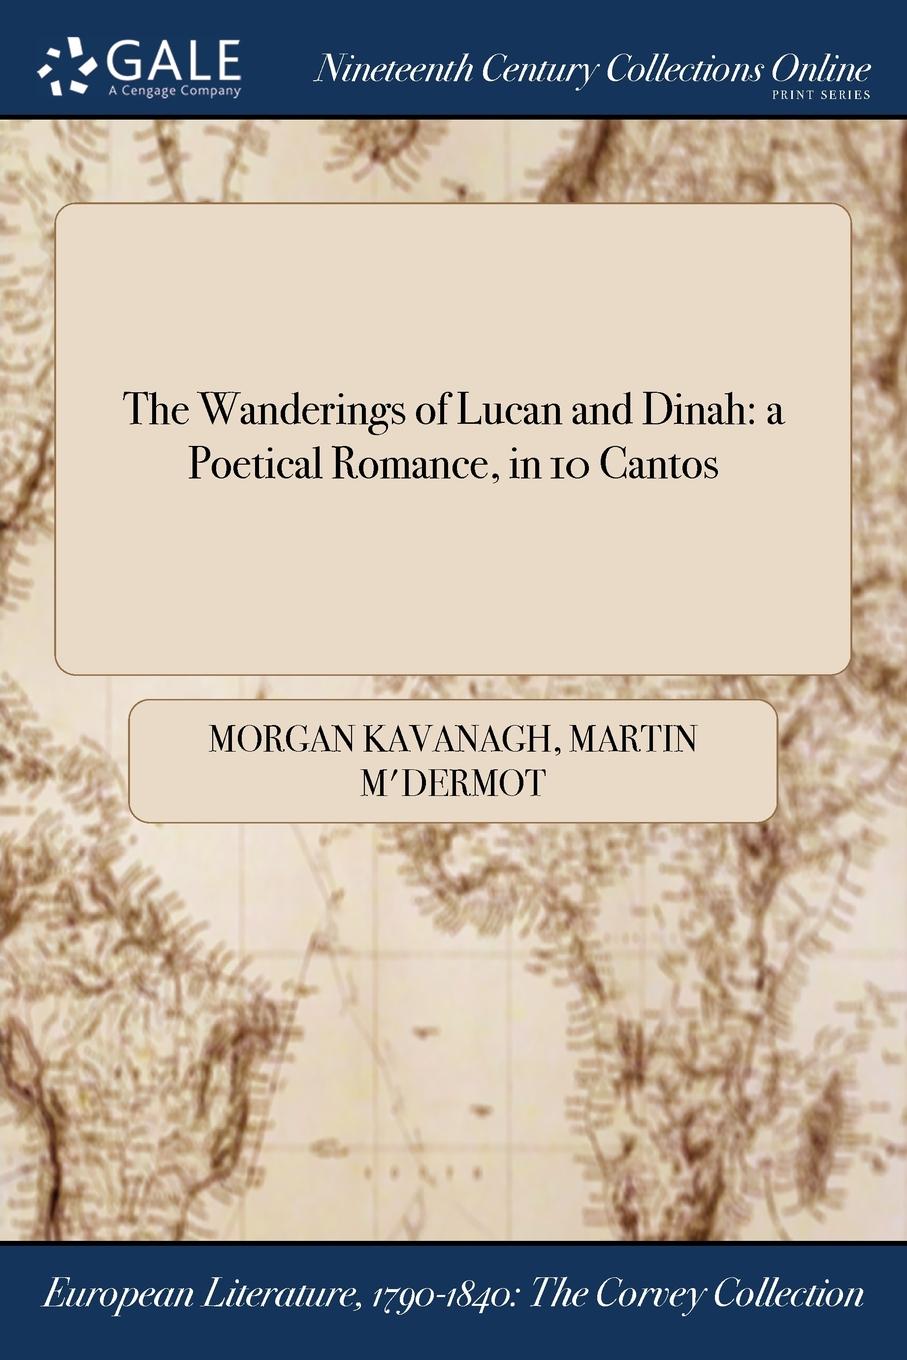 The Wanderings of Lucan and Dinah. a Poetical Romance, in 10 Cantos